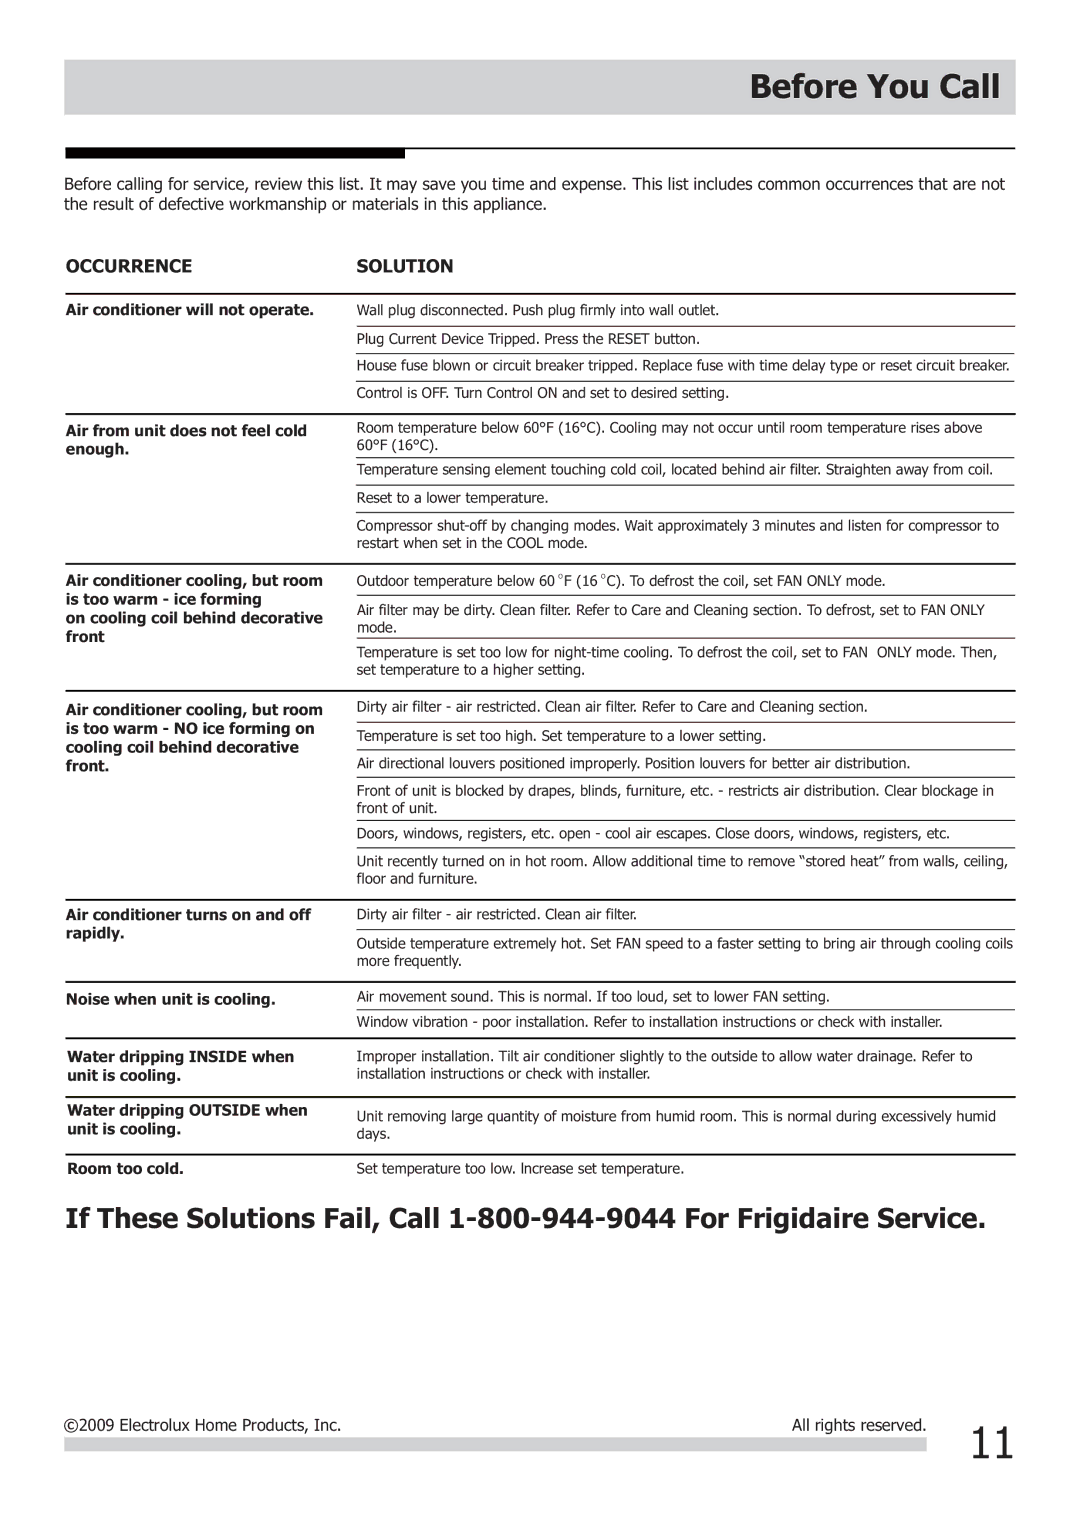 Frigidaire FRA064VU1 important safety instructions Before You Call, Occurrence Solution 